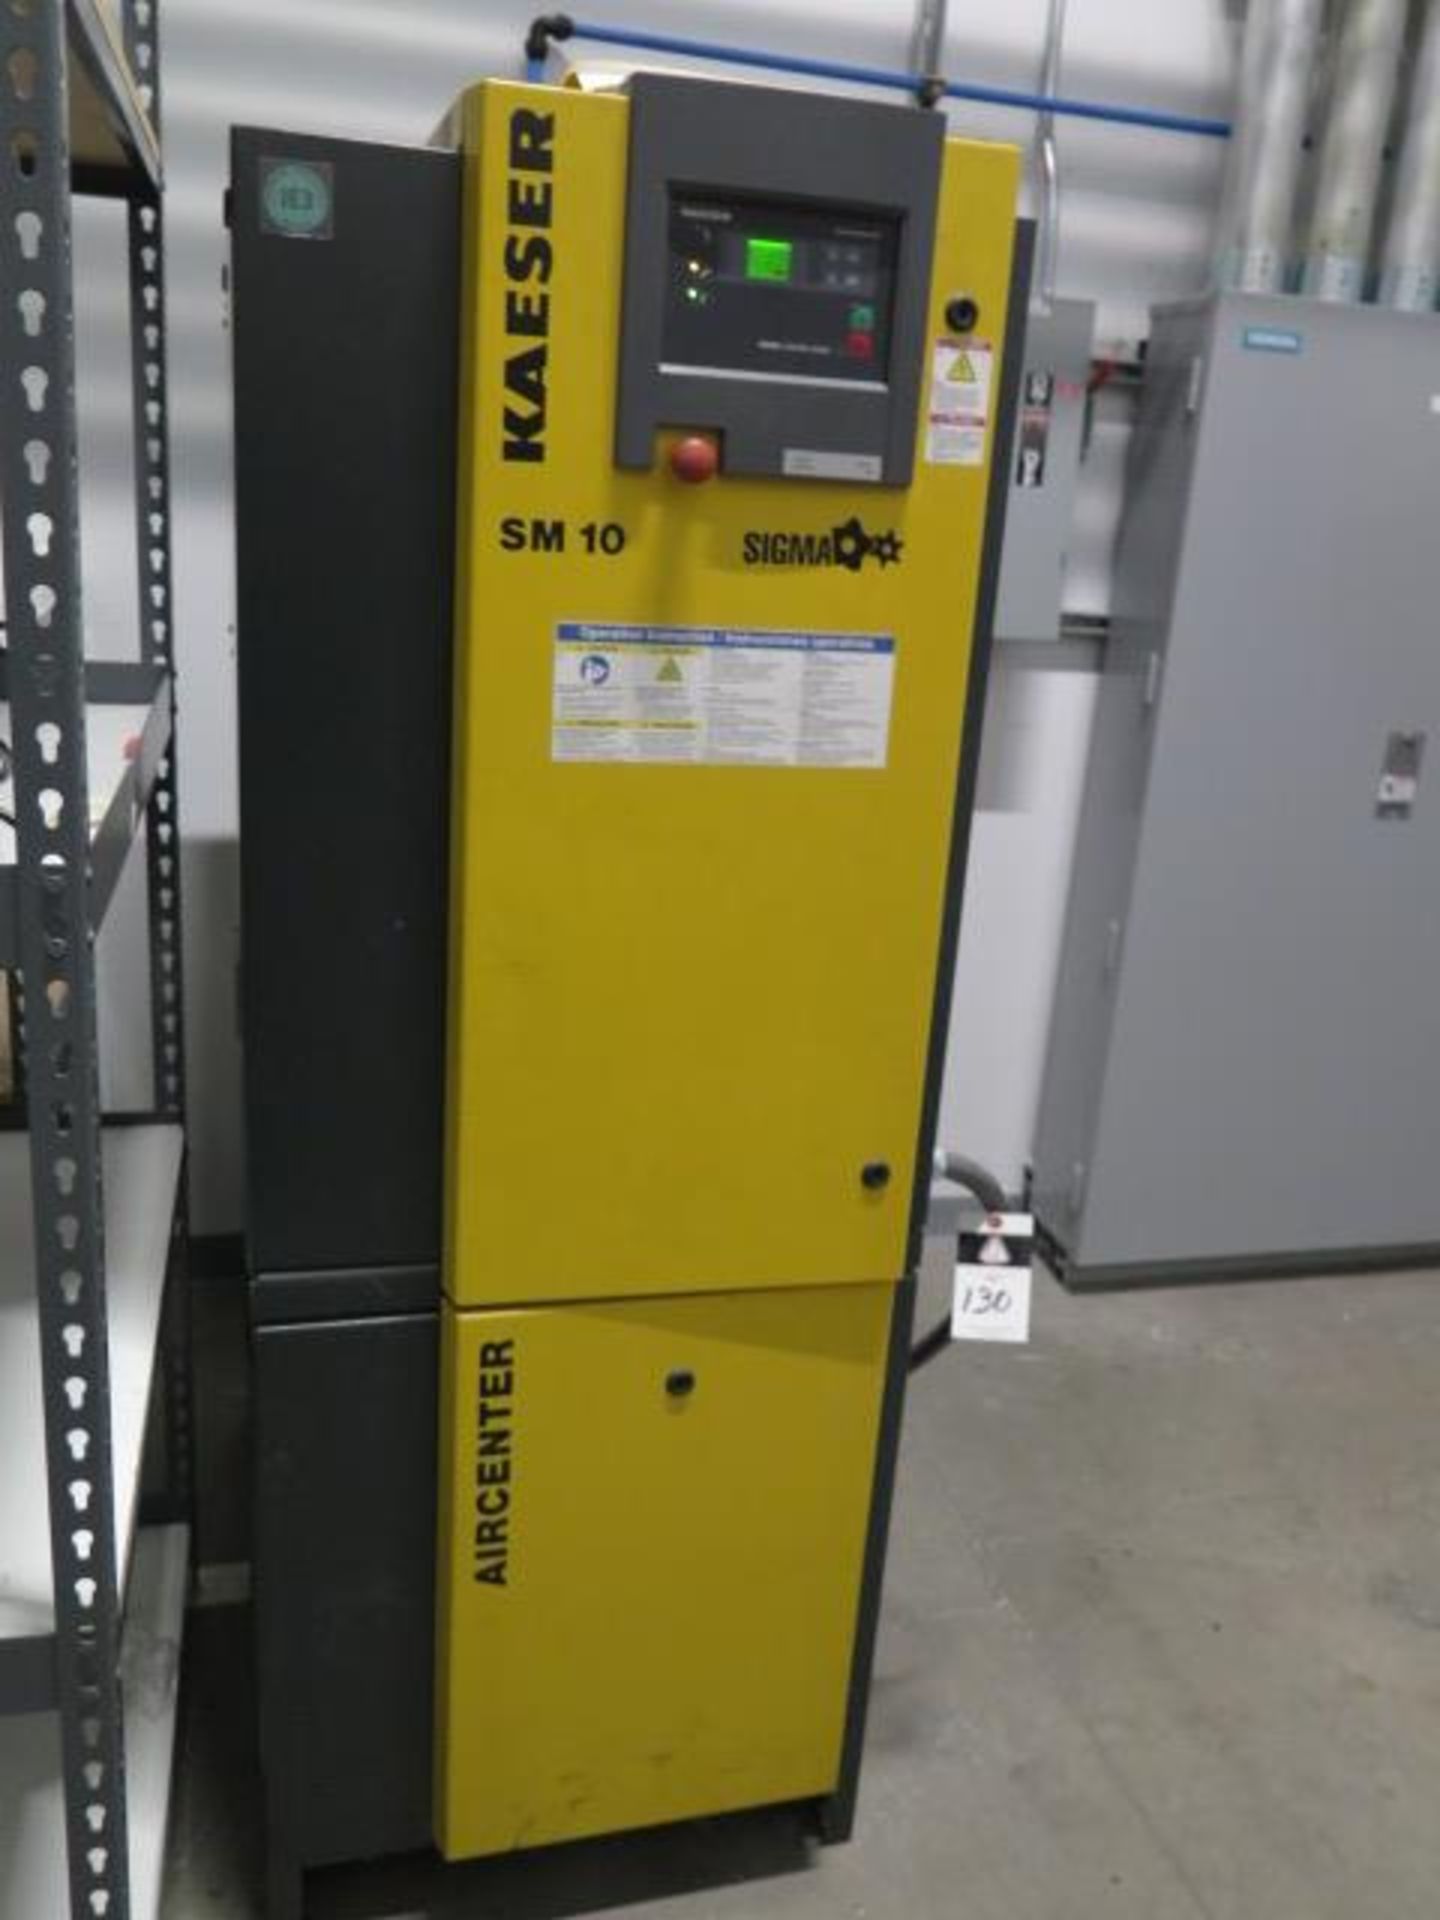 2015 Kaeser Aircenter SM10 10Hp Rotary Air Compressor s/n 1970 w/ Kaeser Sigma Controls, SOLD AS IS - Image 3 of 9